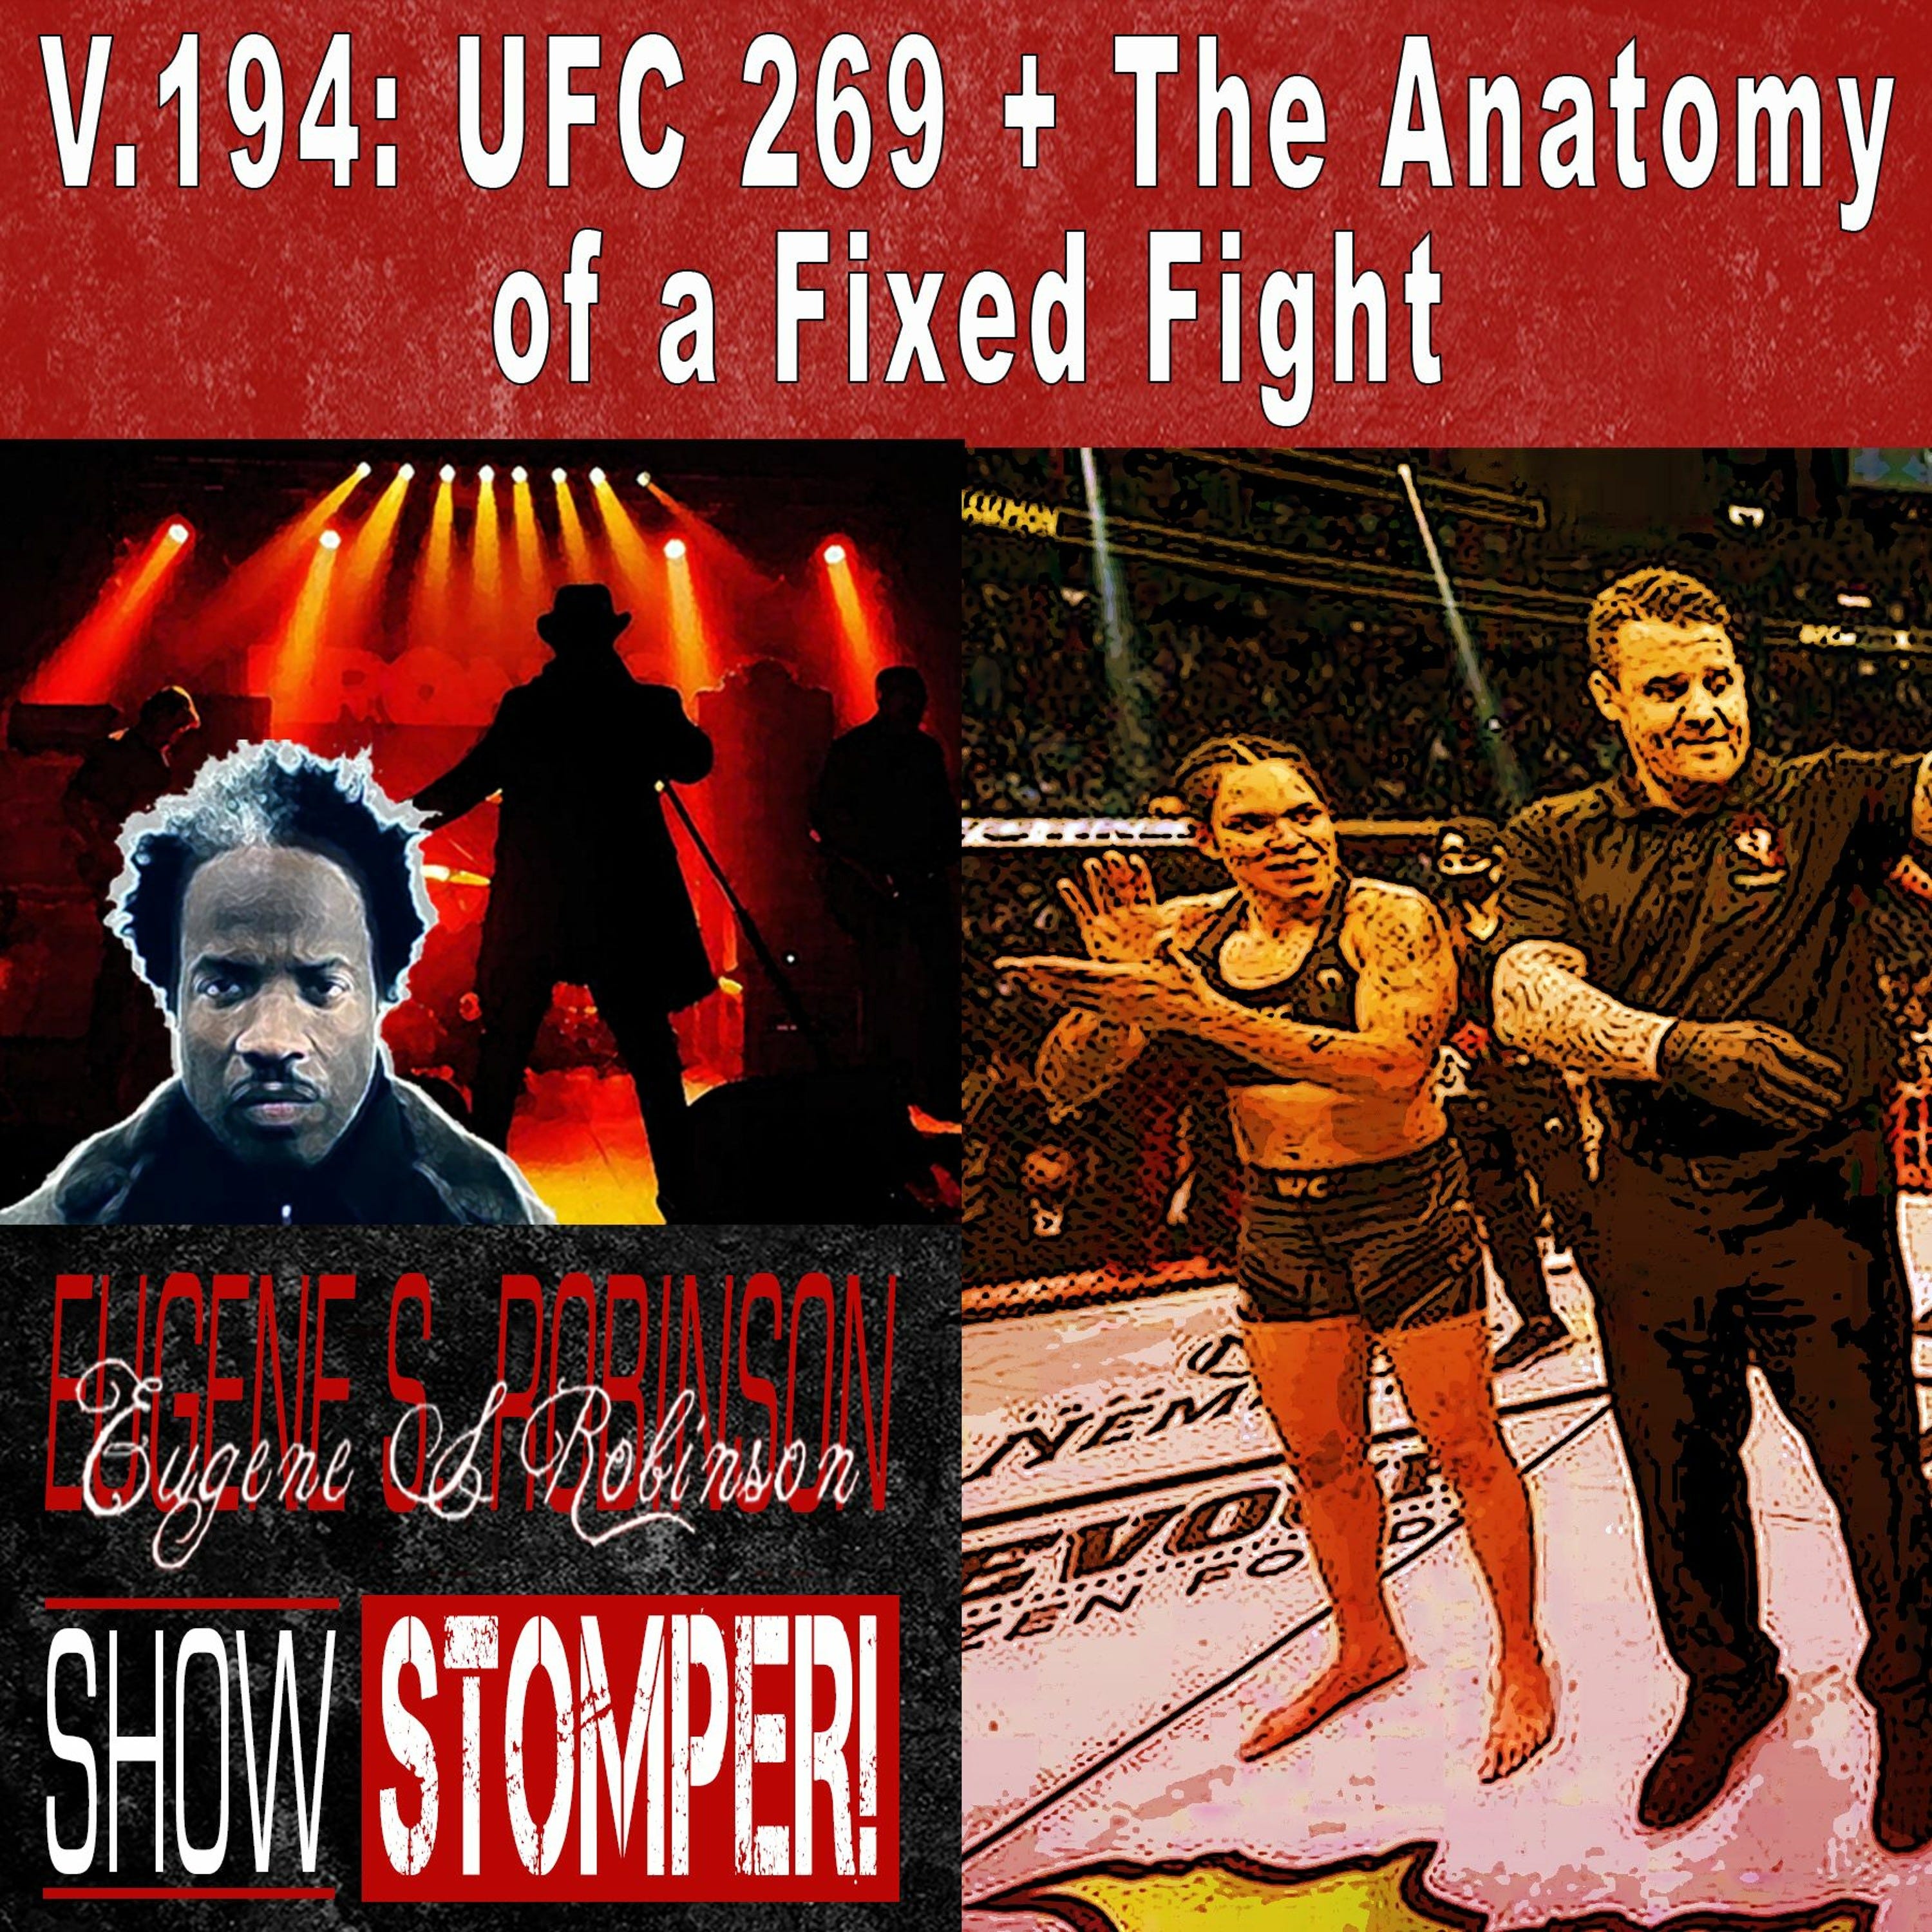 V.194 UFC 269 + The Anatomy Of A Fixed Fight On The Eugene S. Robinson Show Stomper!